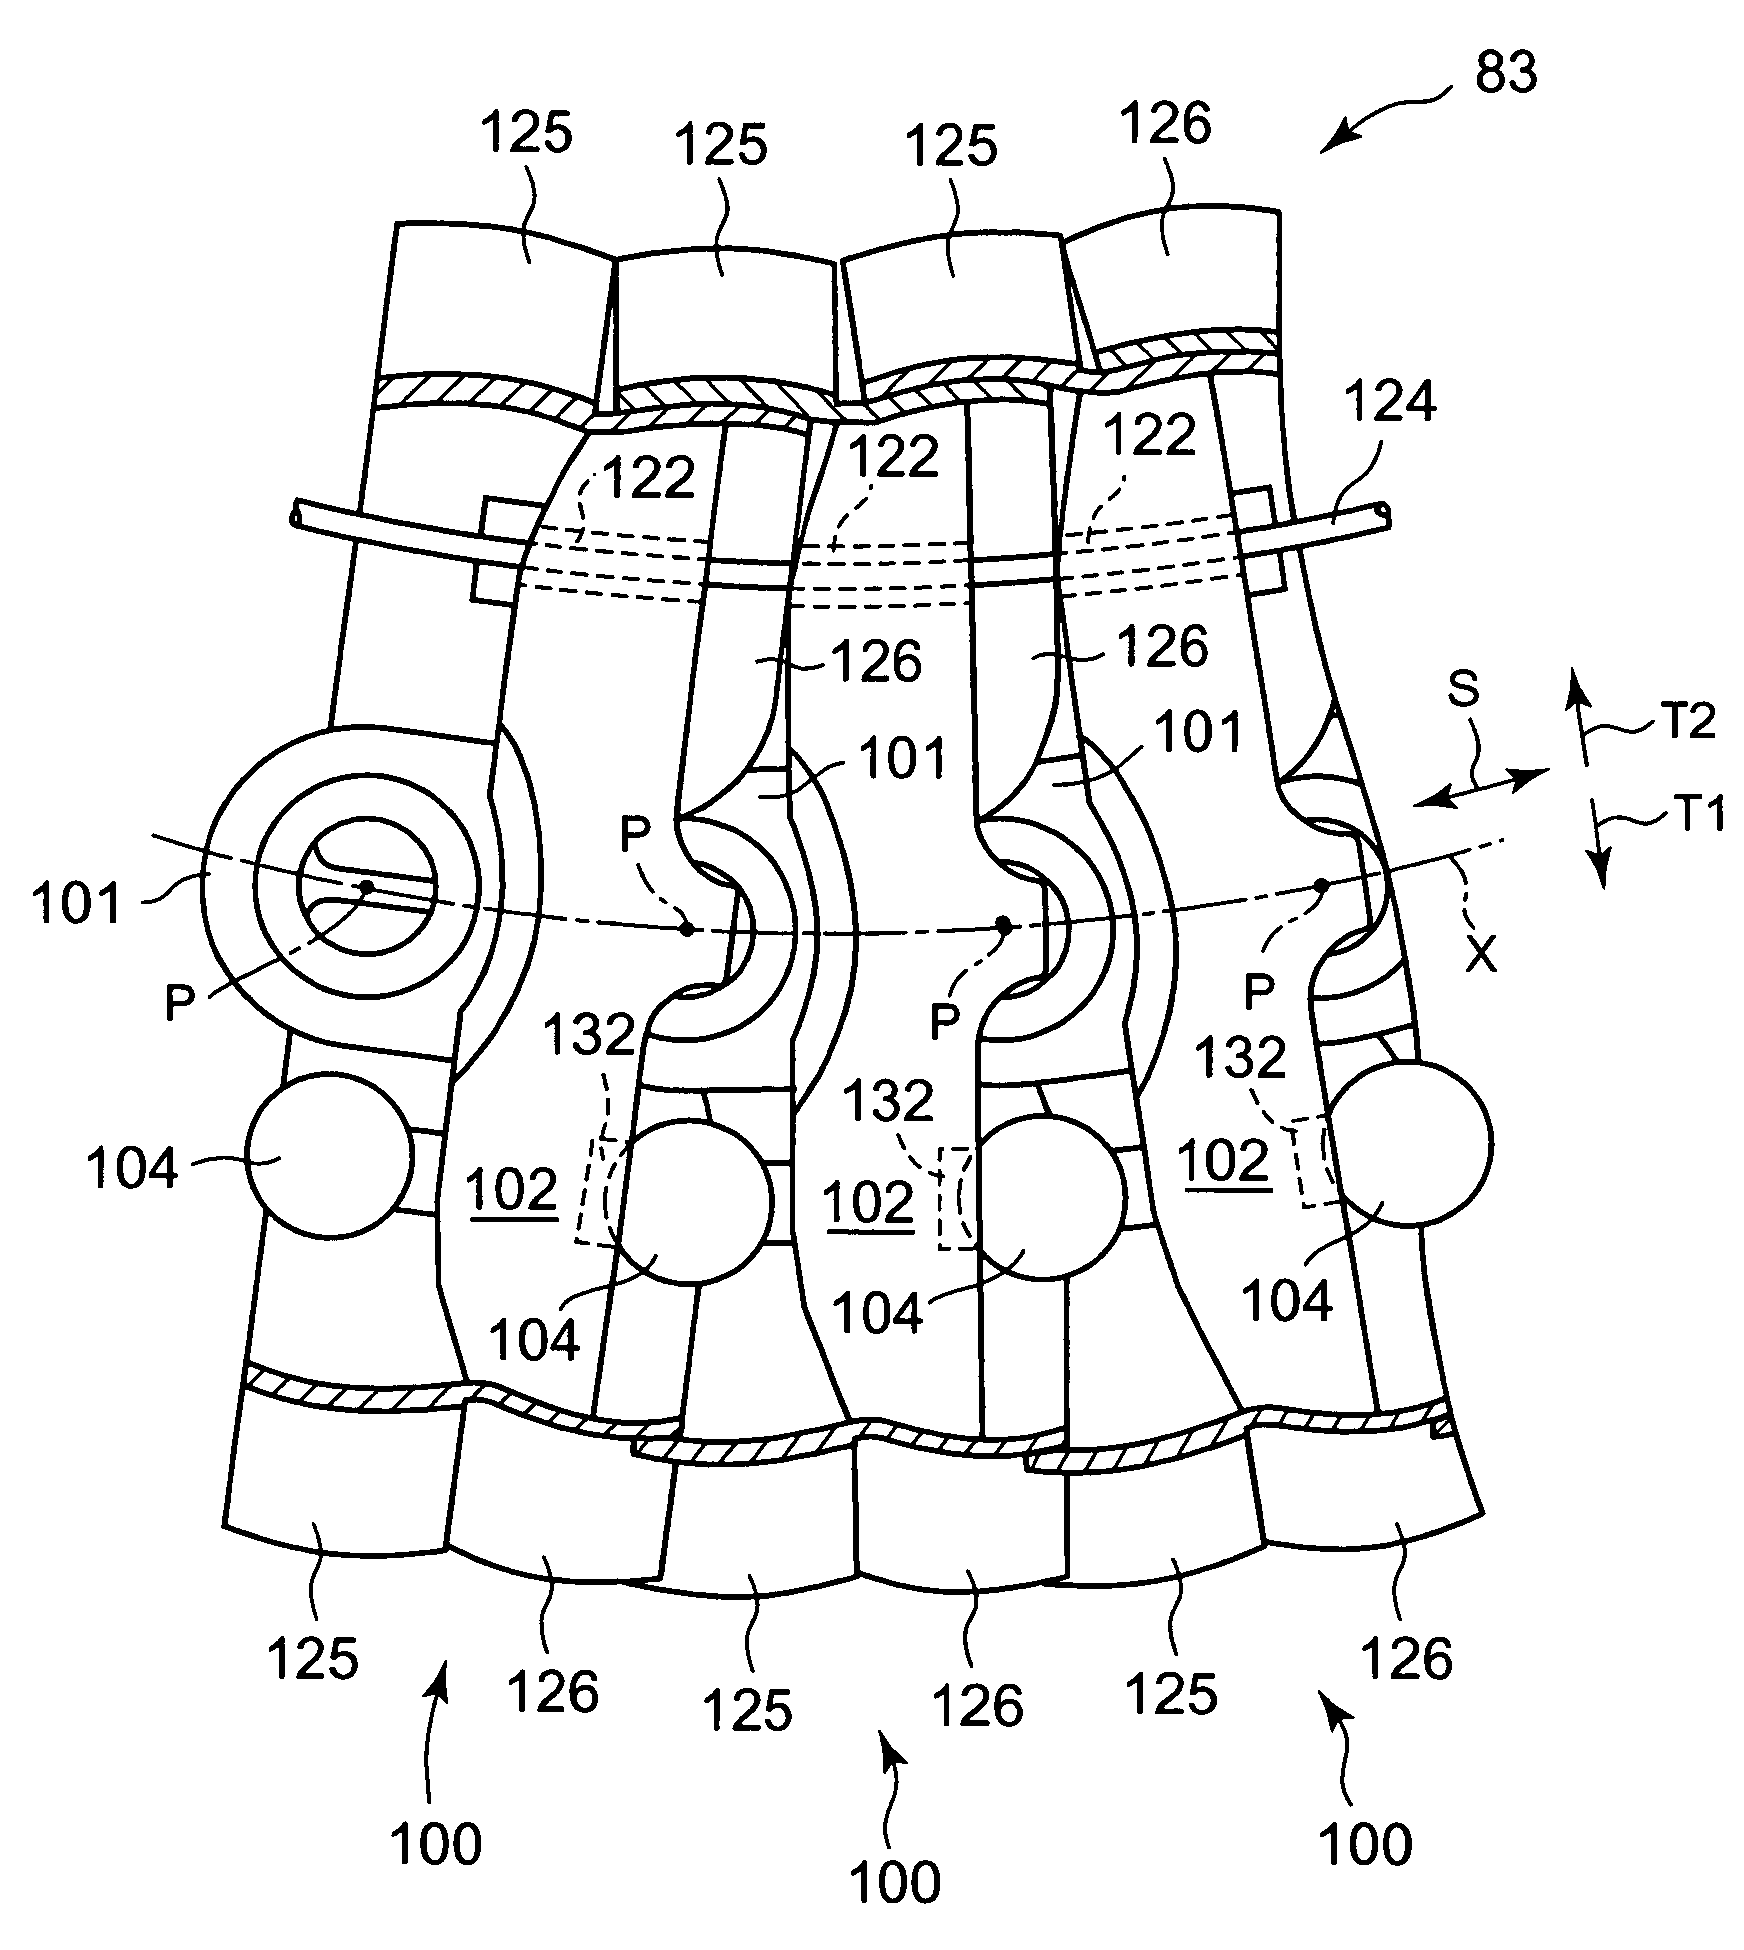 Deformable structure and cable support system